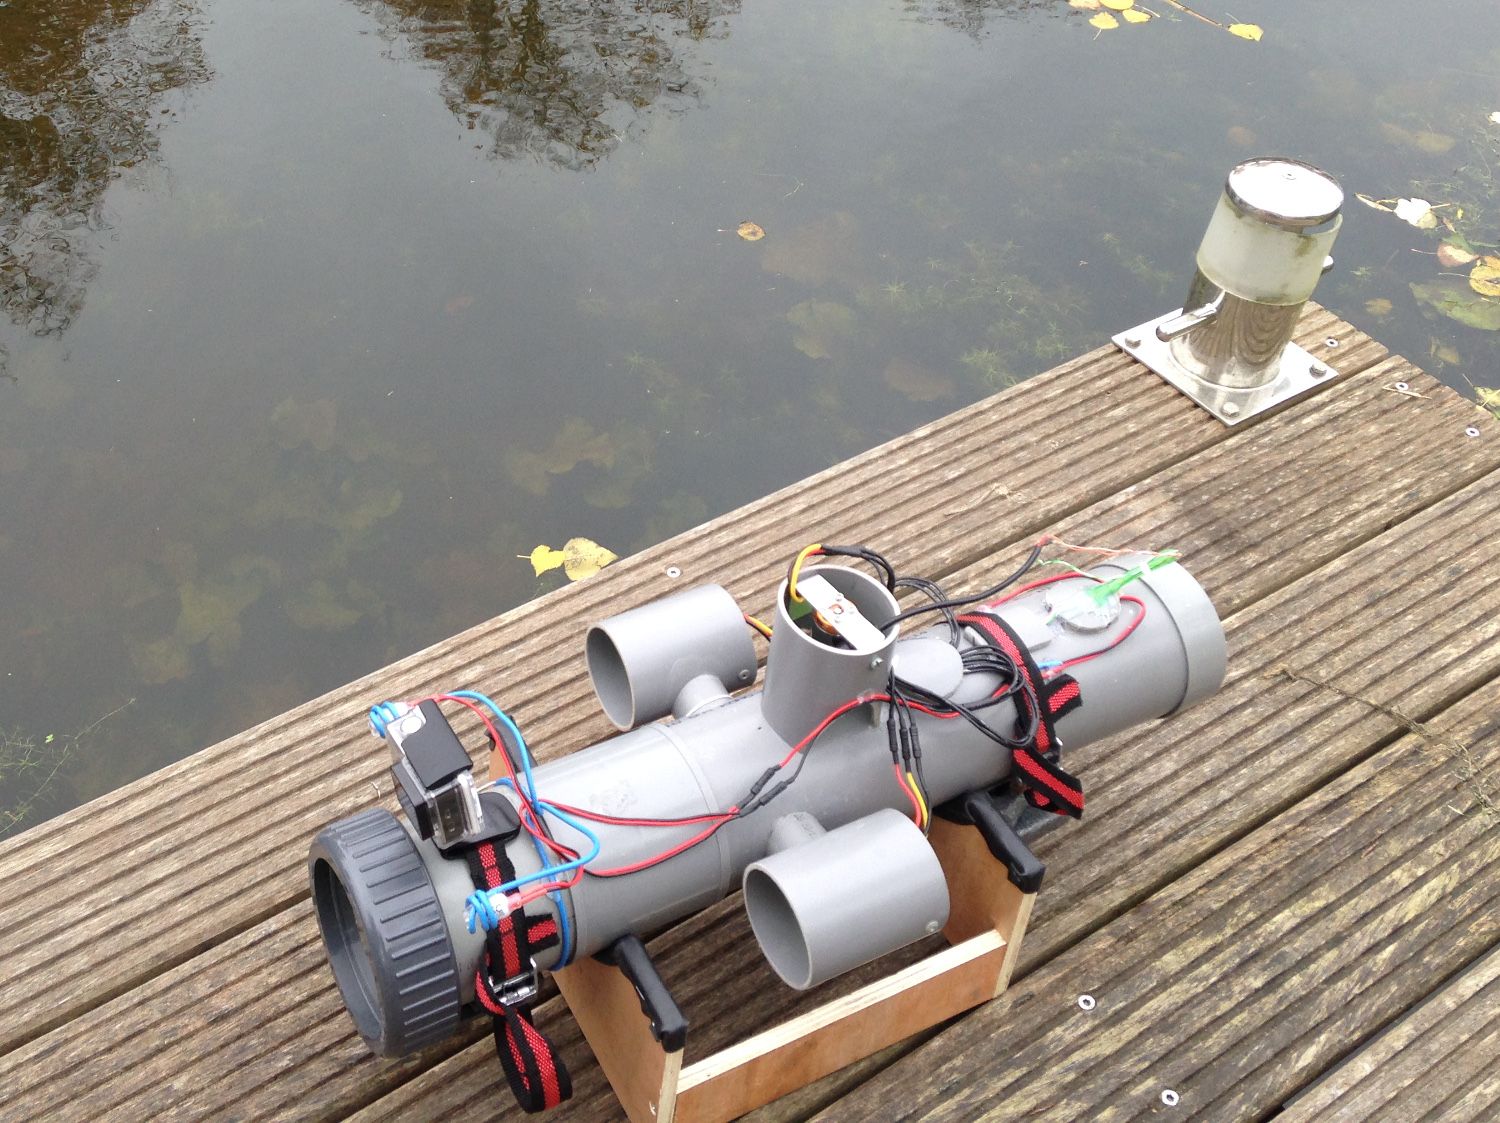 Submersible drone, powered by Pi — The MagPi magazine